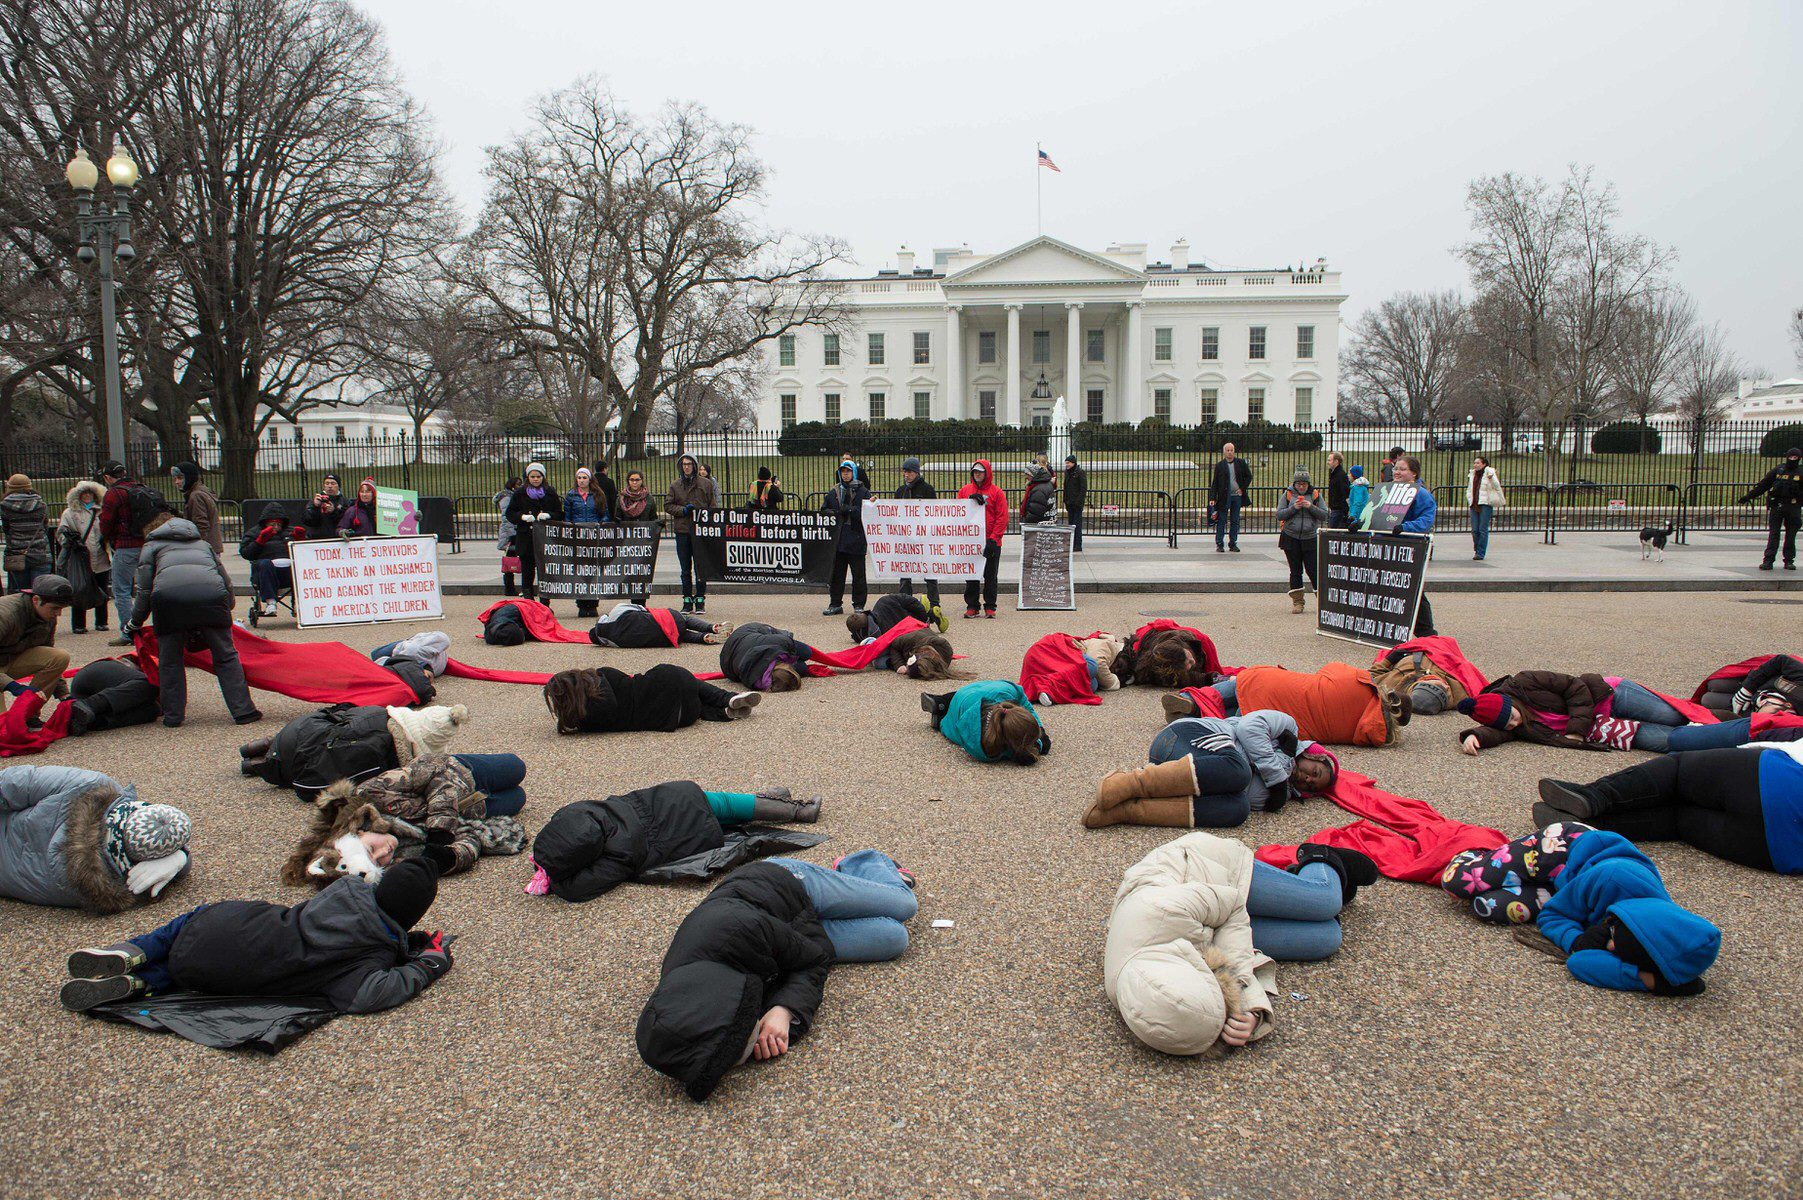 Anti-abortion activists lay on the ground in front of the White House on January 21, 2015.